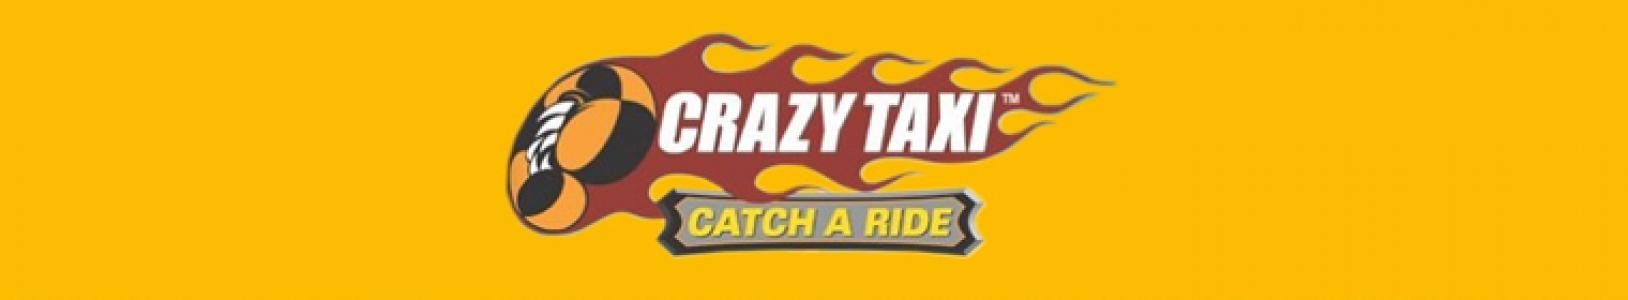 Crazy Taxi: Catch a Ride banner